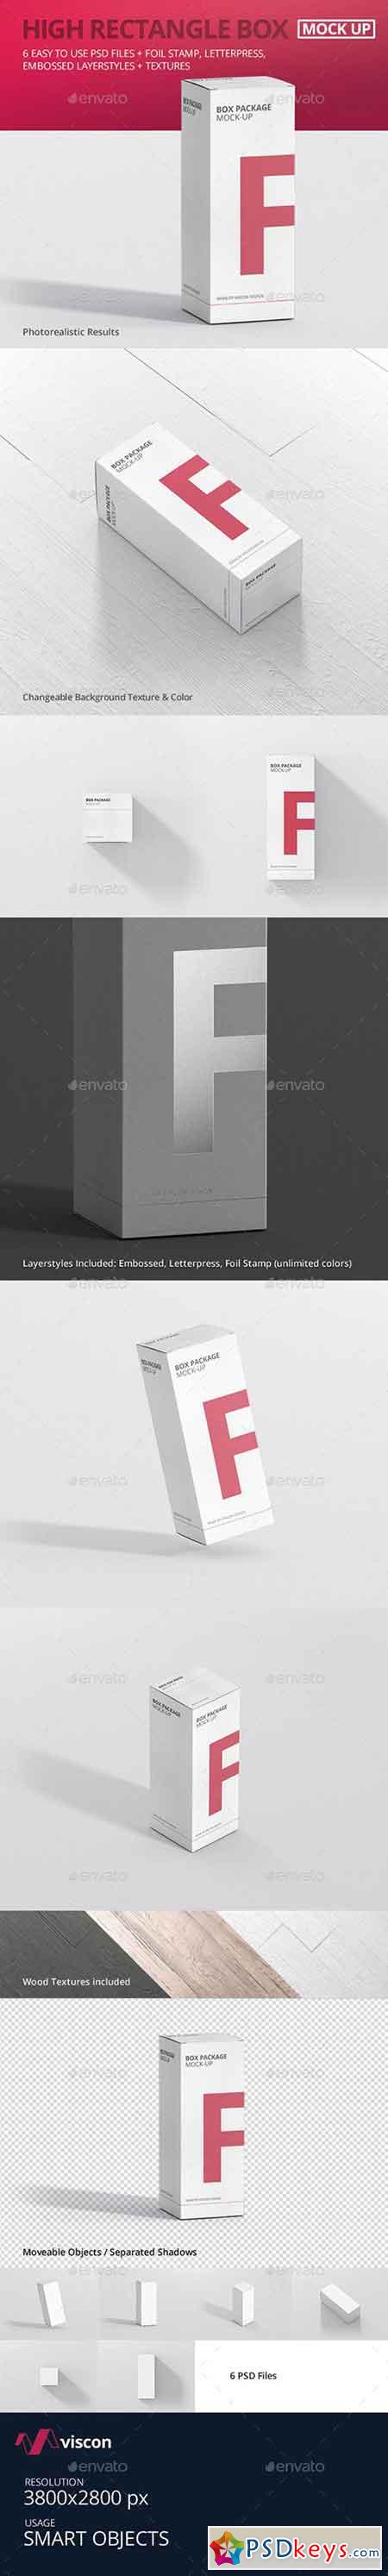 Package Box Mock-Up - High Rectangle 16828585